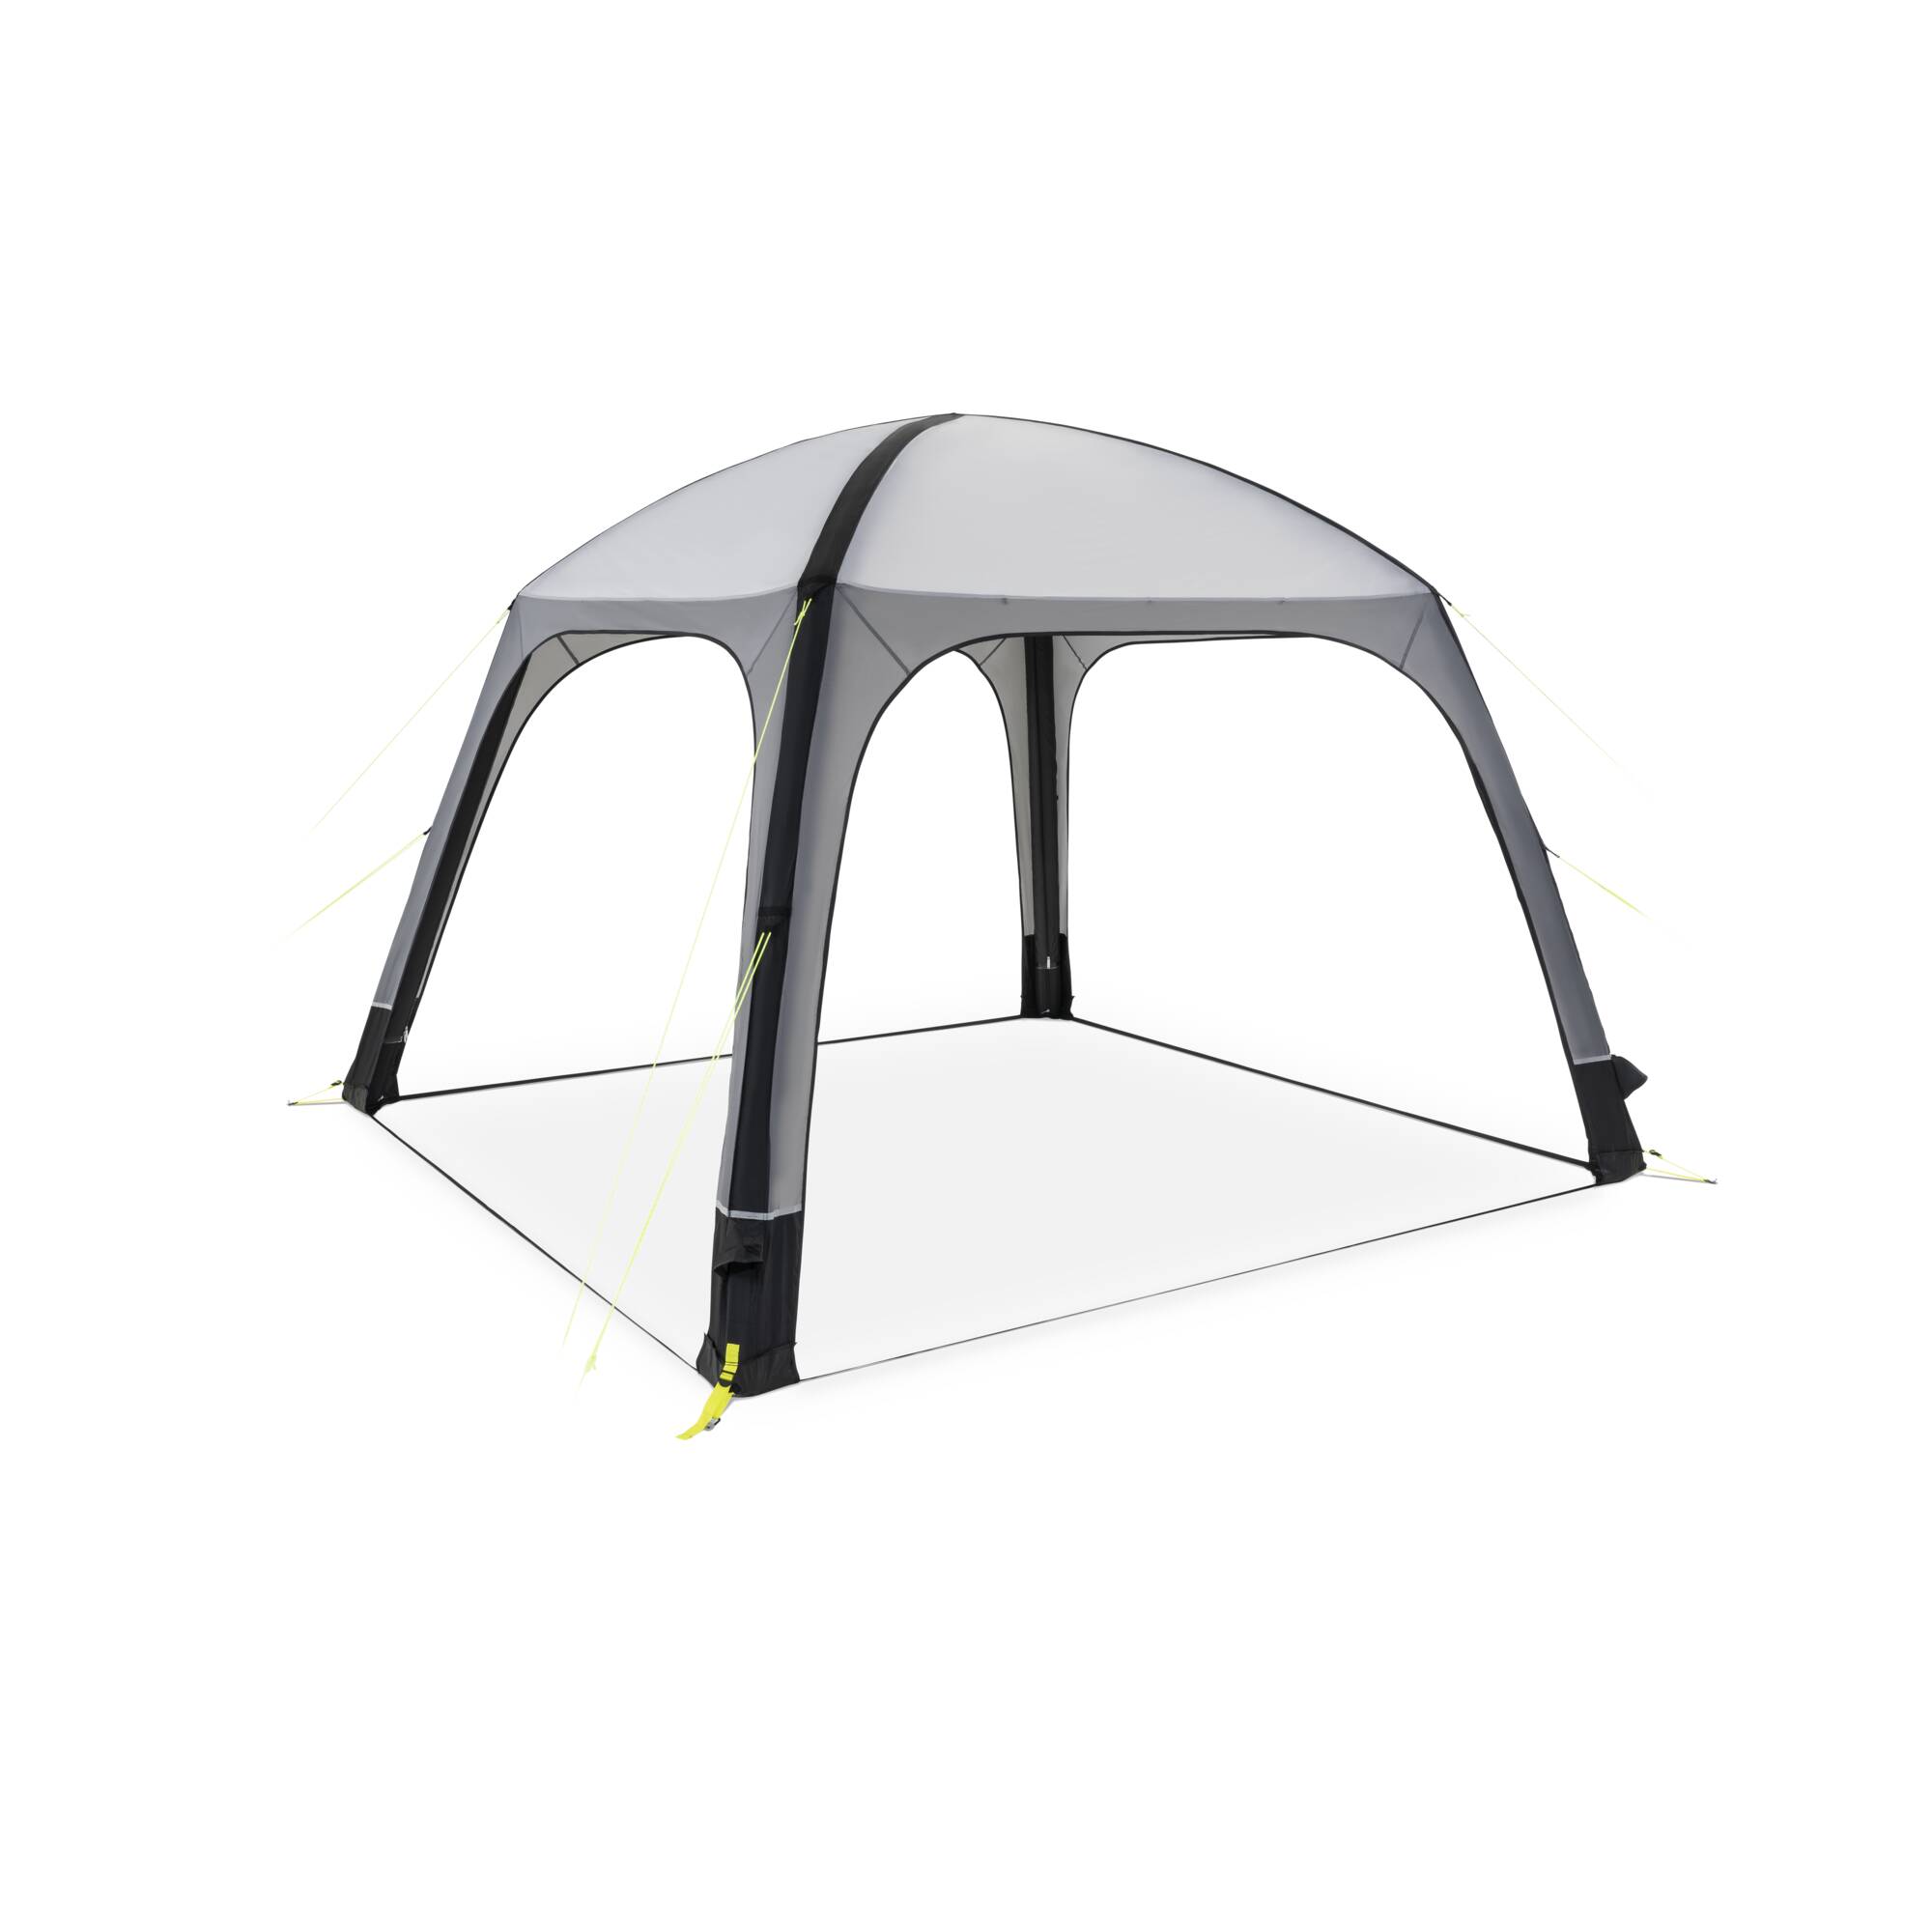 Dometic Air Shelter 300 Tent Spare Parts